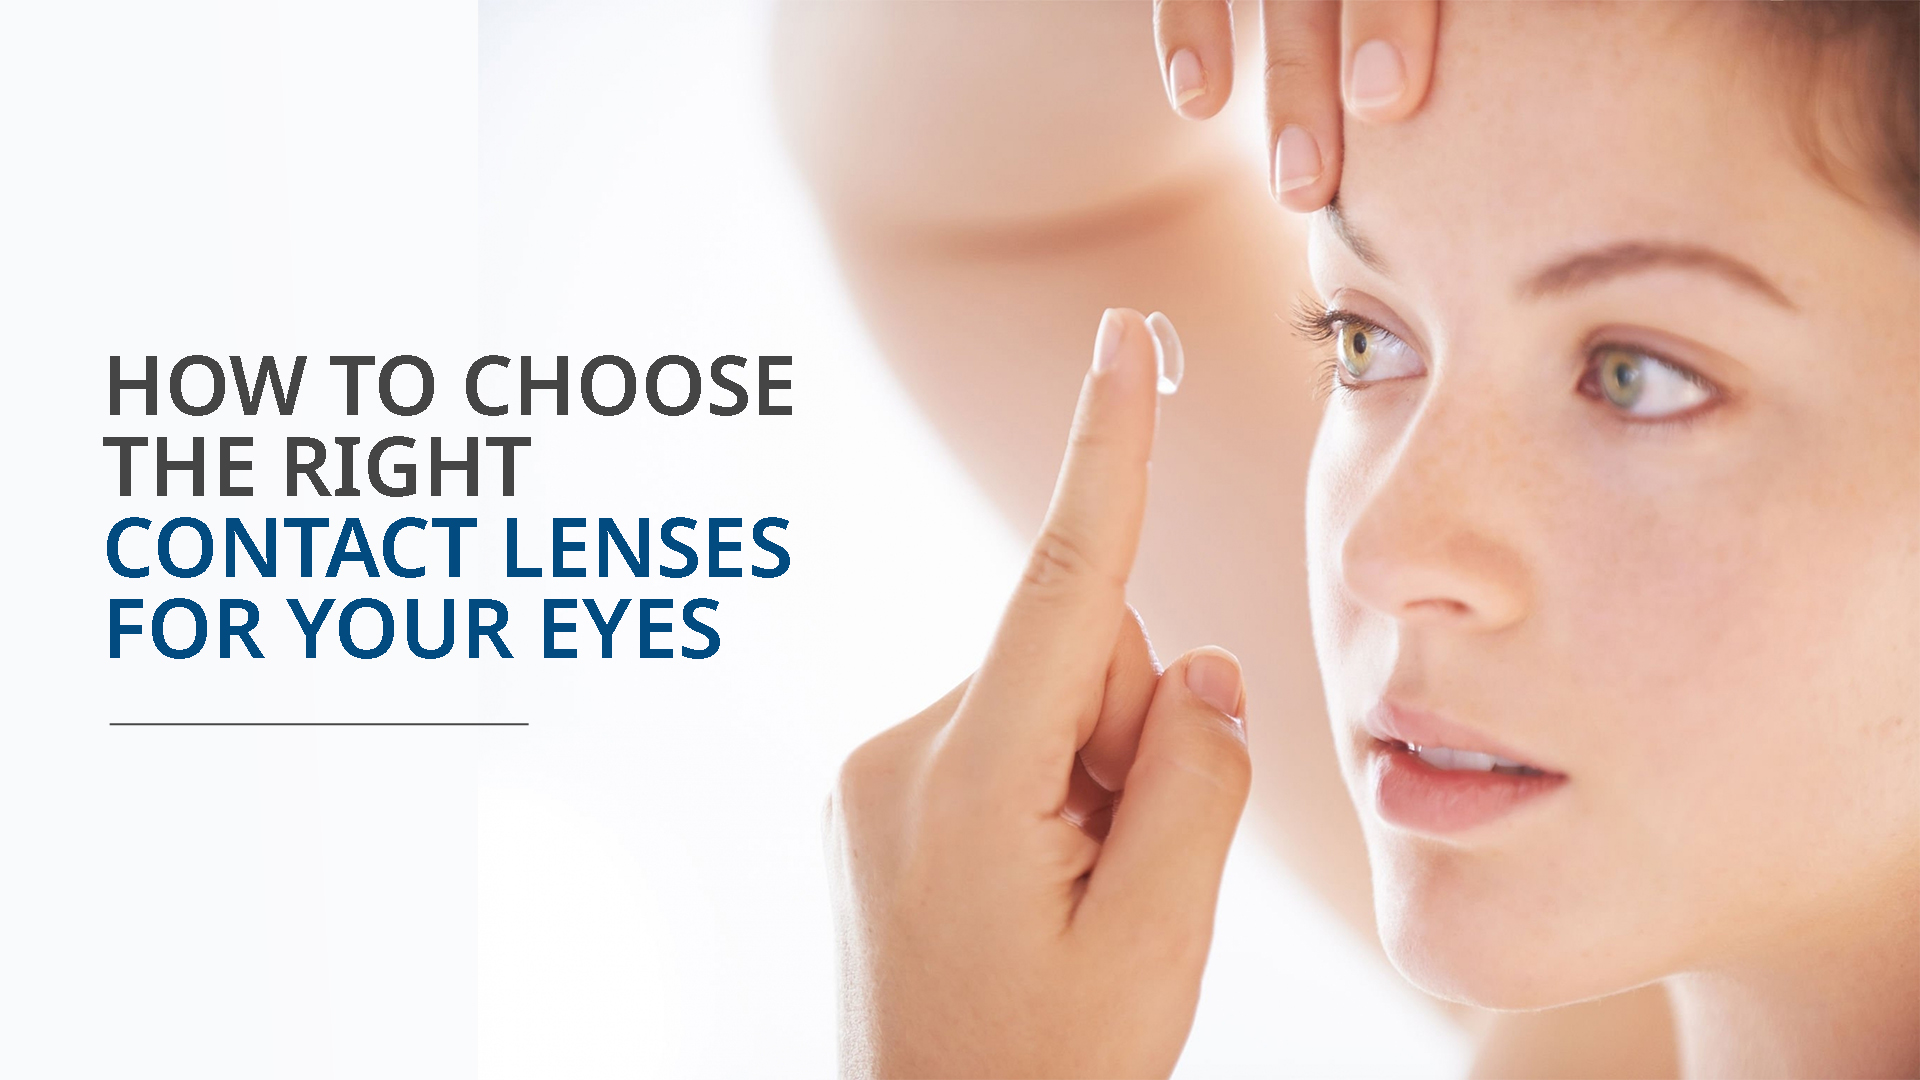 How to Choose the Right Contact Lenses for Your Eyes